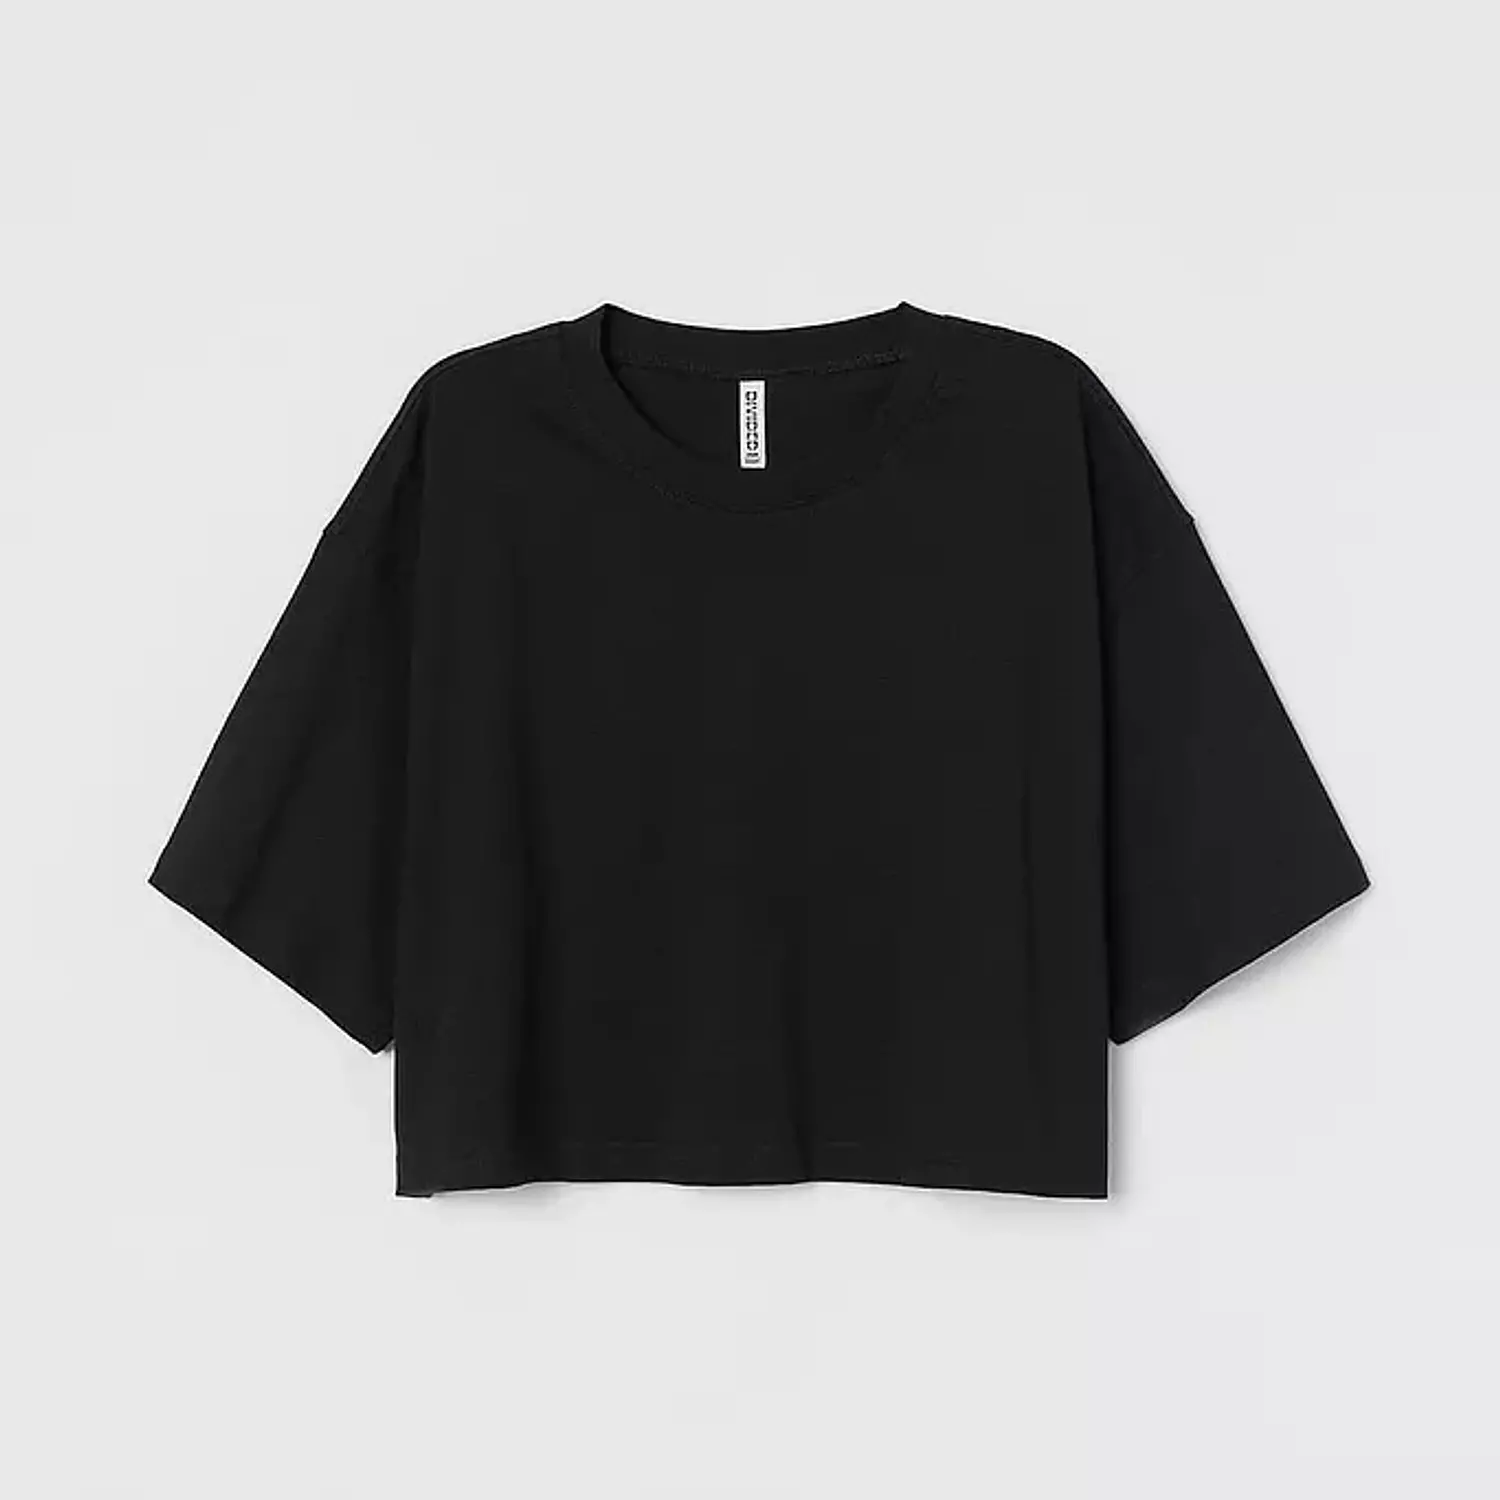 Black Tee hover image